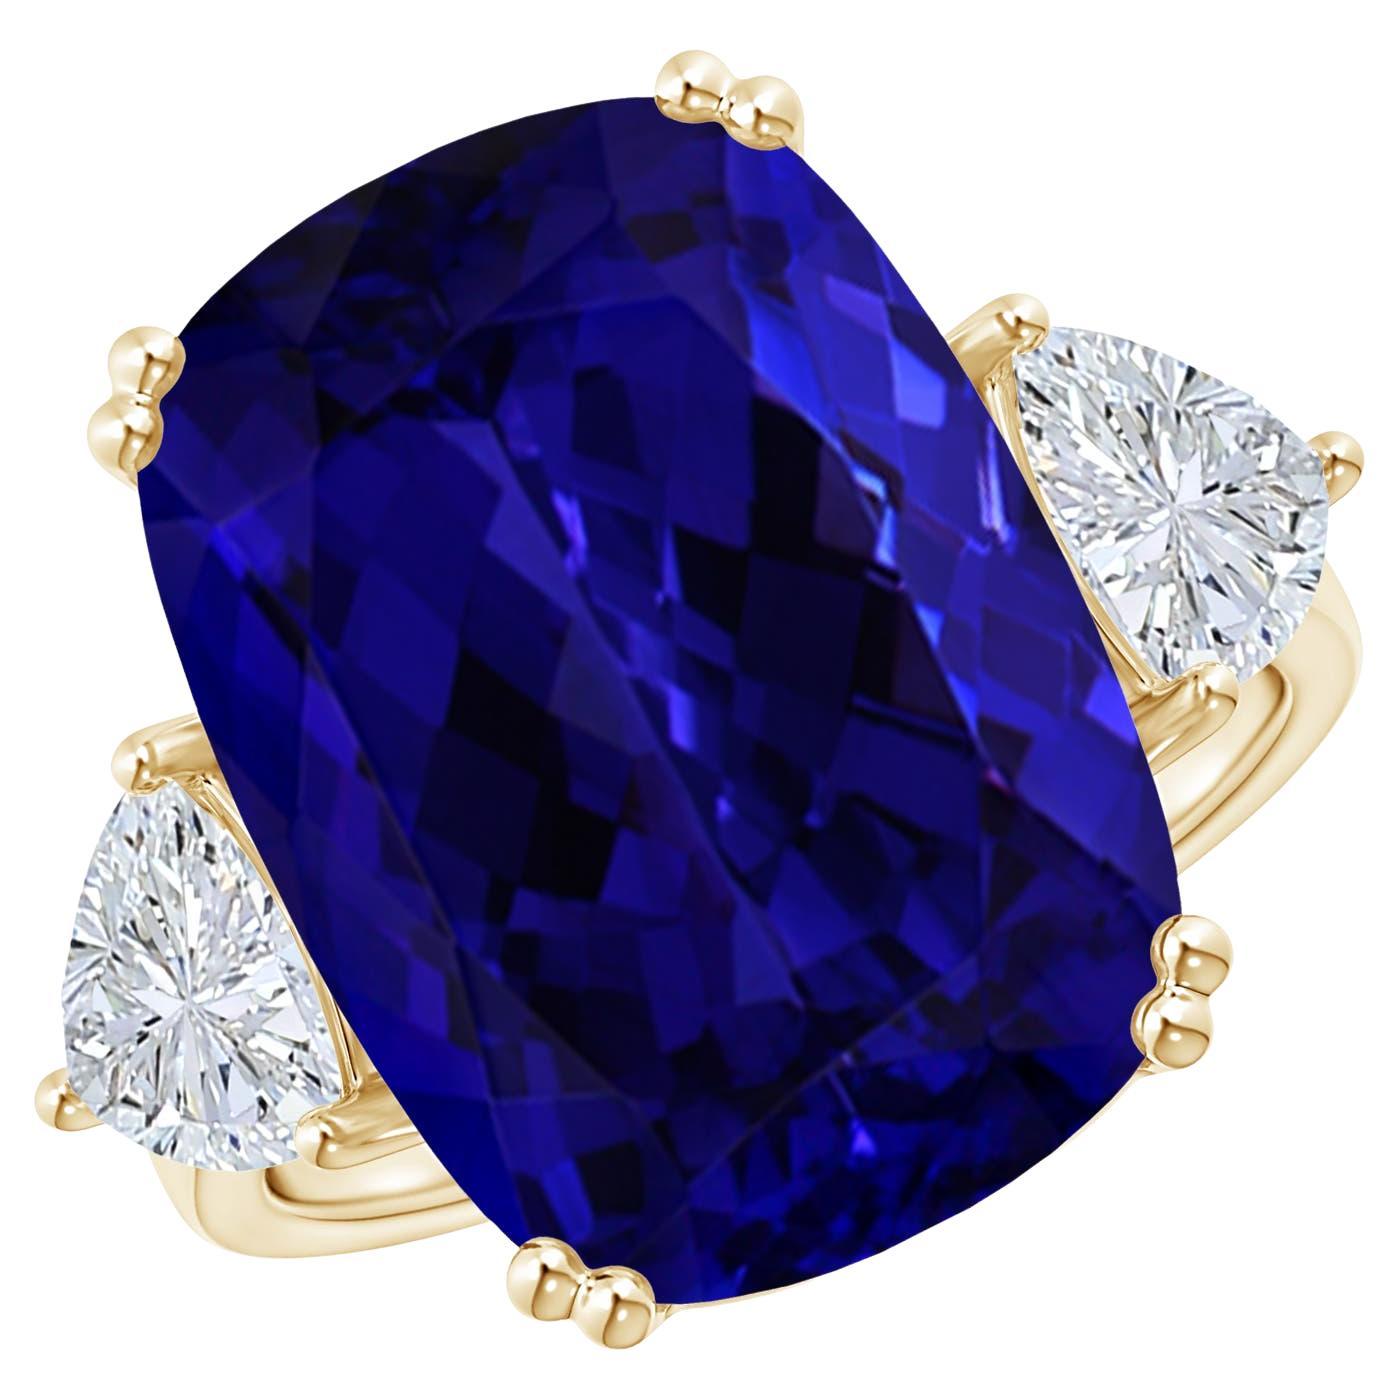 For Sale:  Flanked by Sparkling Trillion Diamonds Is a GIA Certified Cushion Tanzanite Held